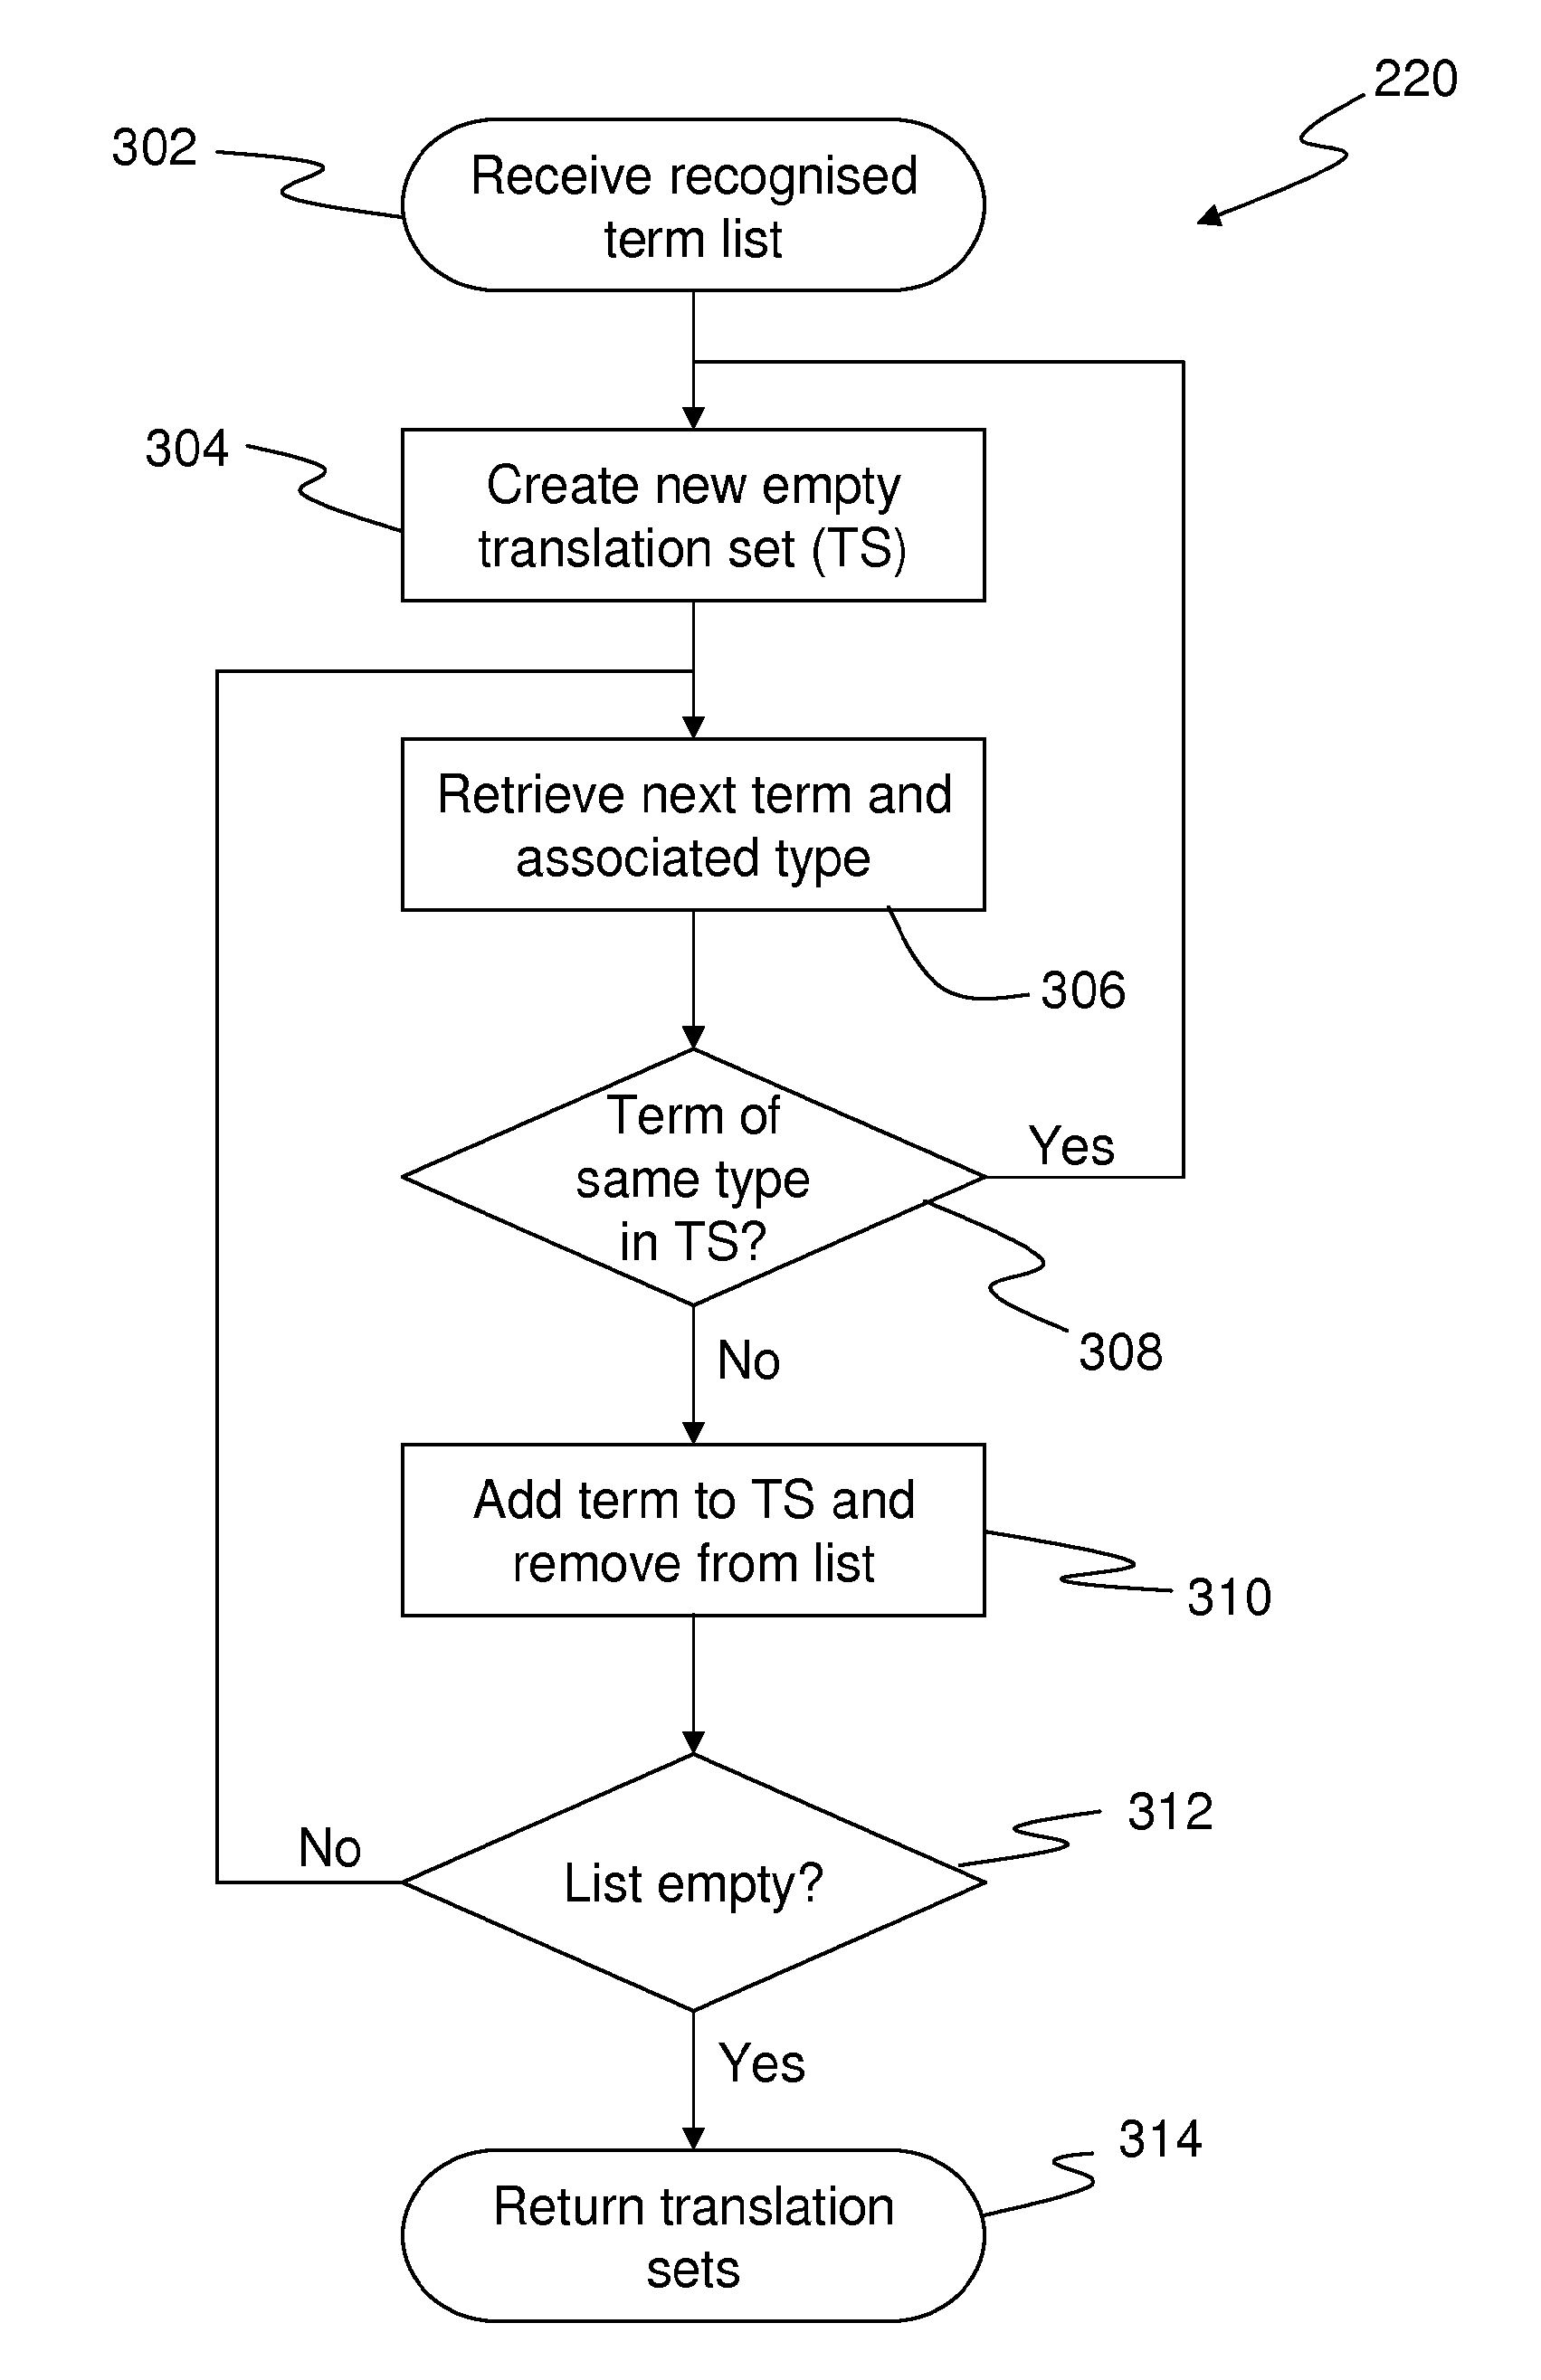 Method and System for Classification of Clinical Information